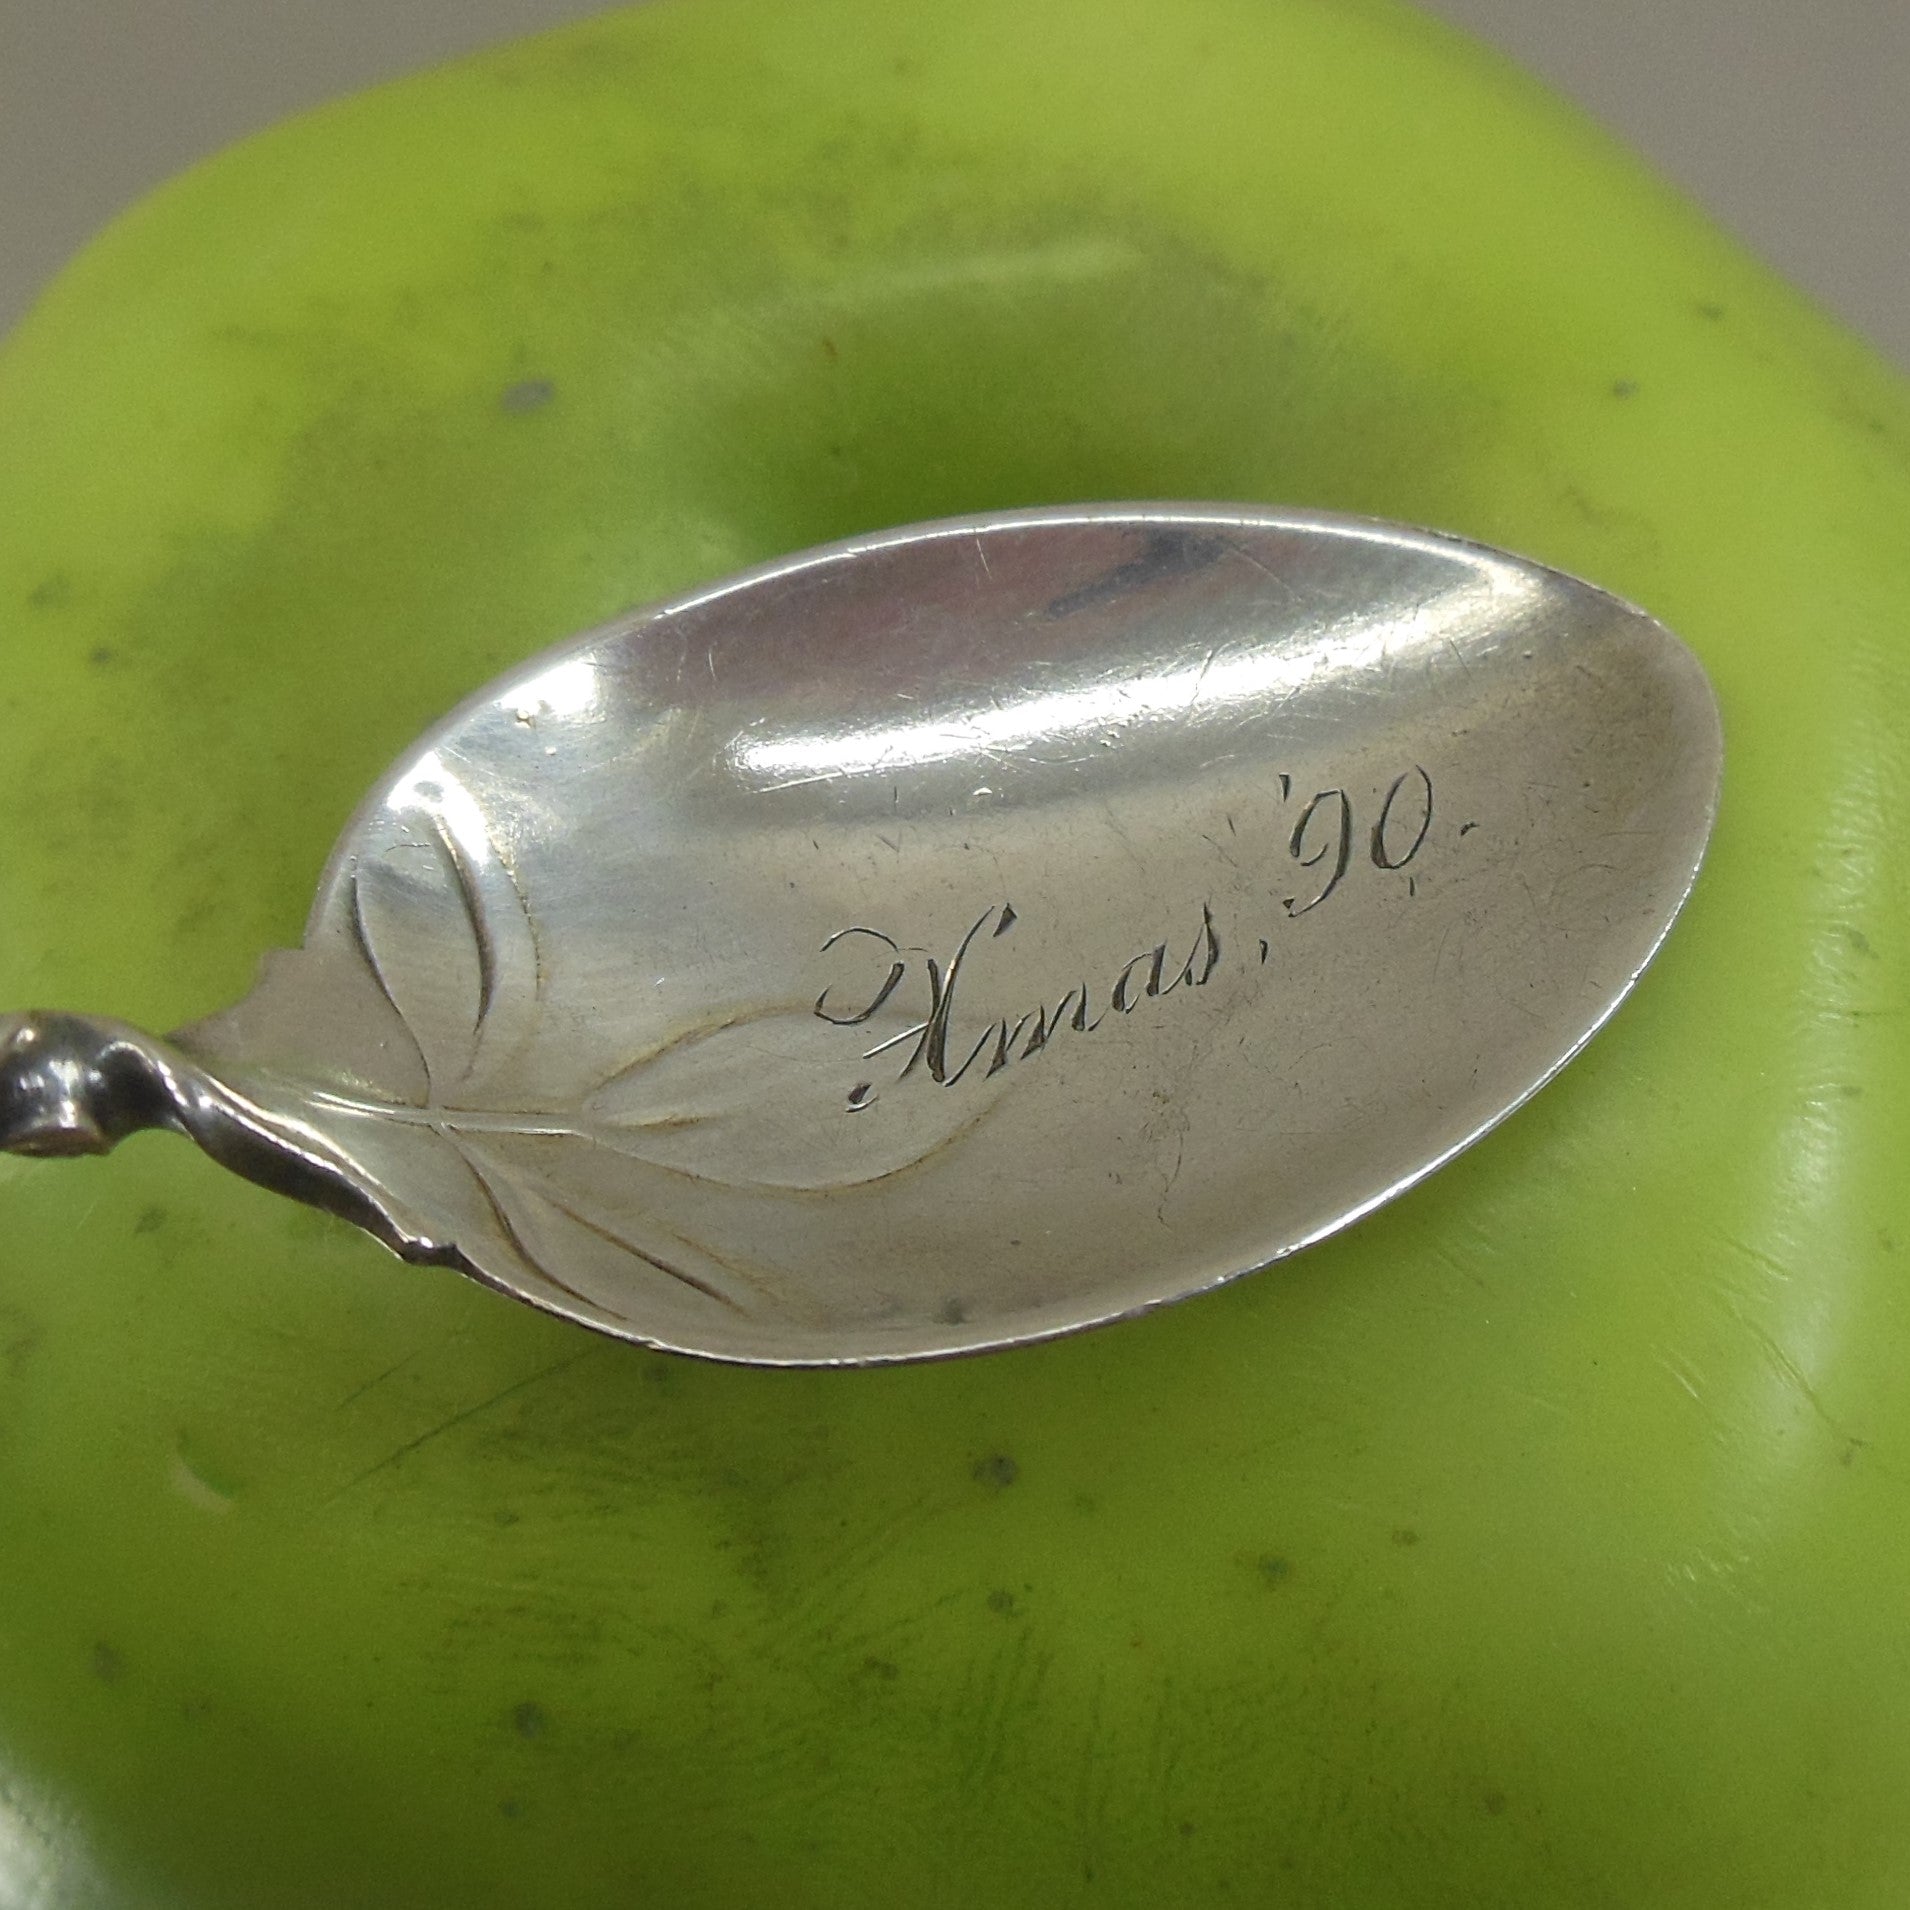 Whiting Sterling Silver Antique 1890 Christmas Demitasse Spoon "Xmas '90" engraved